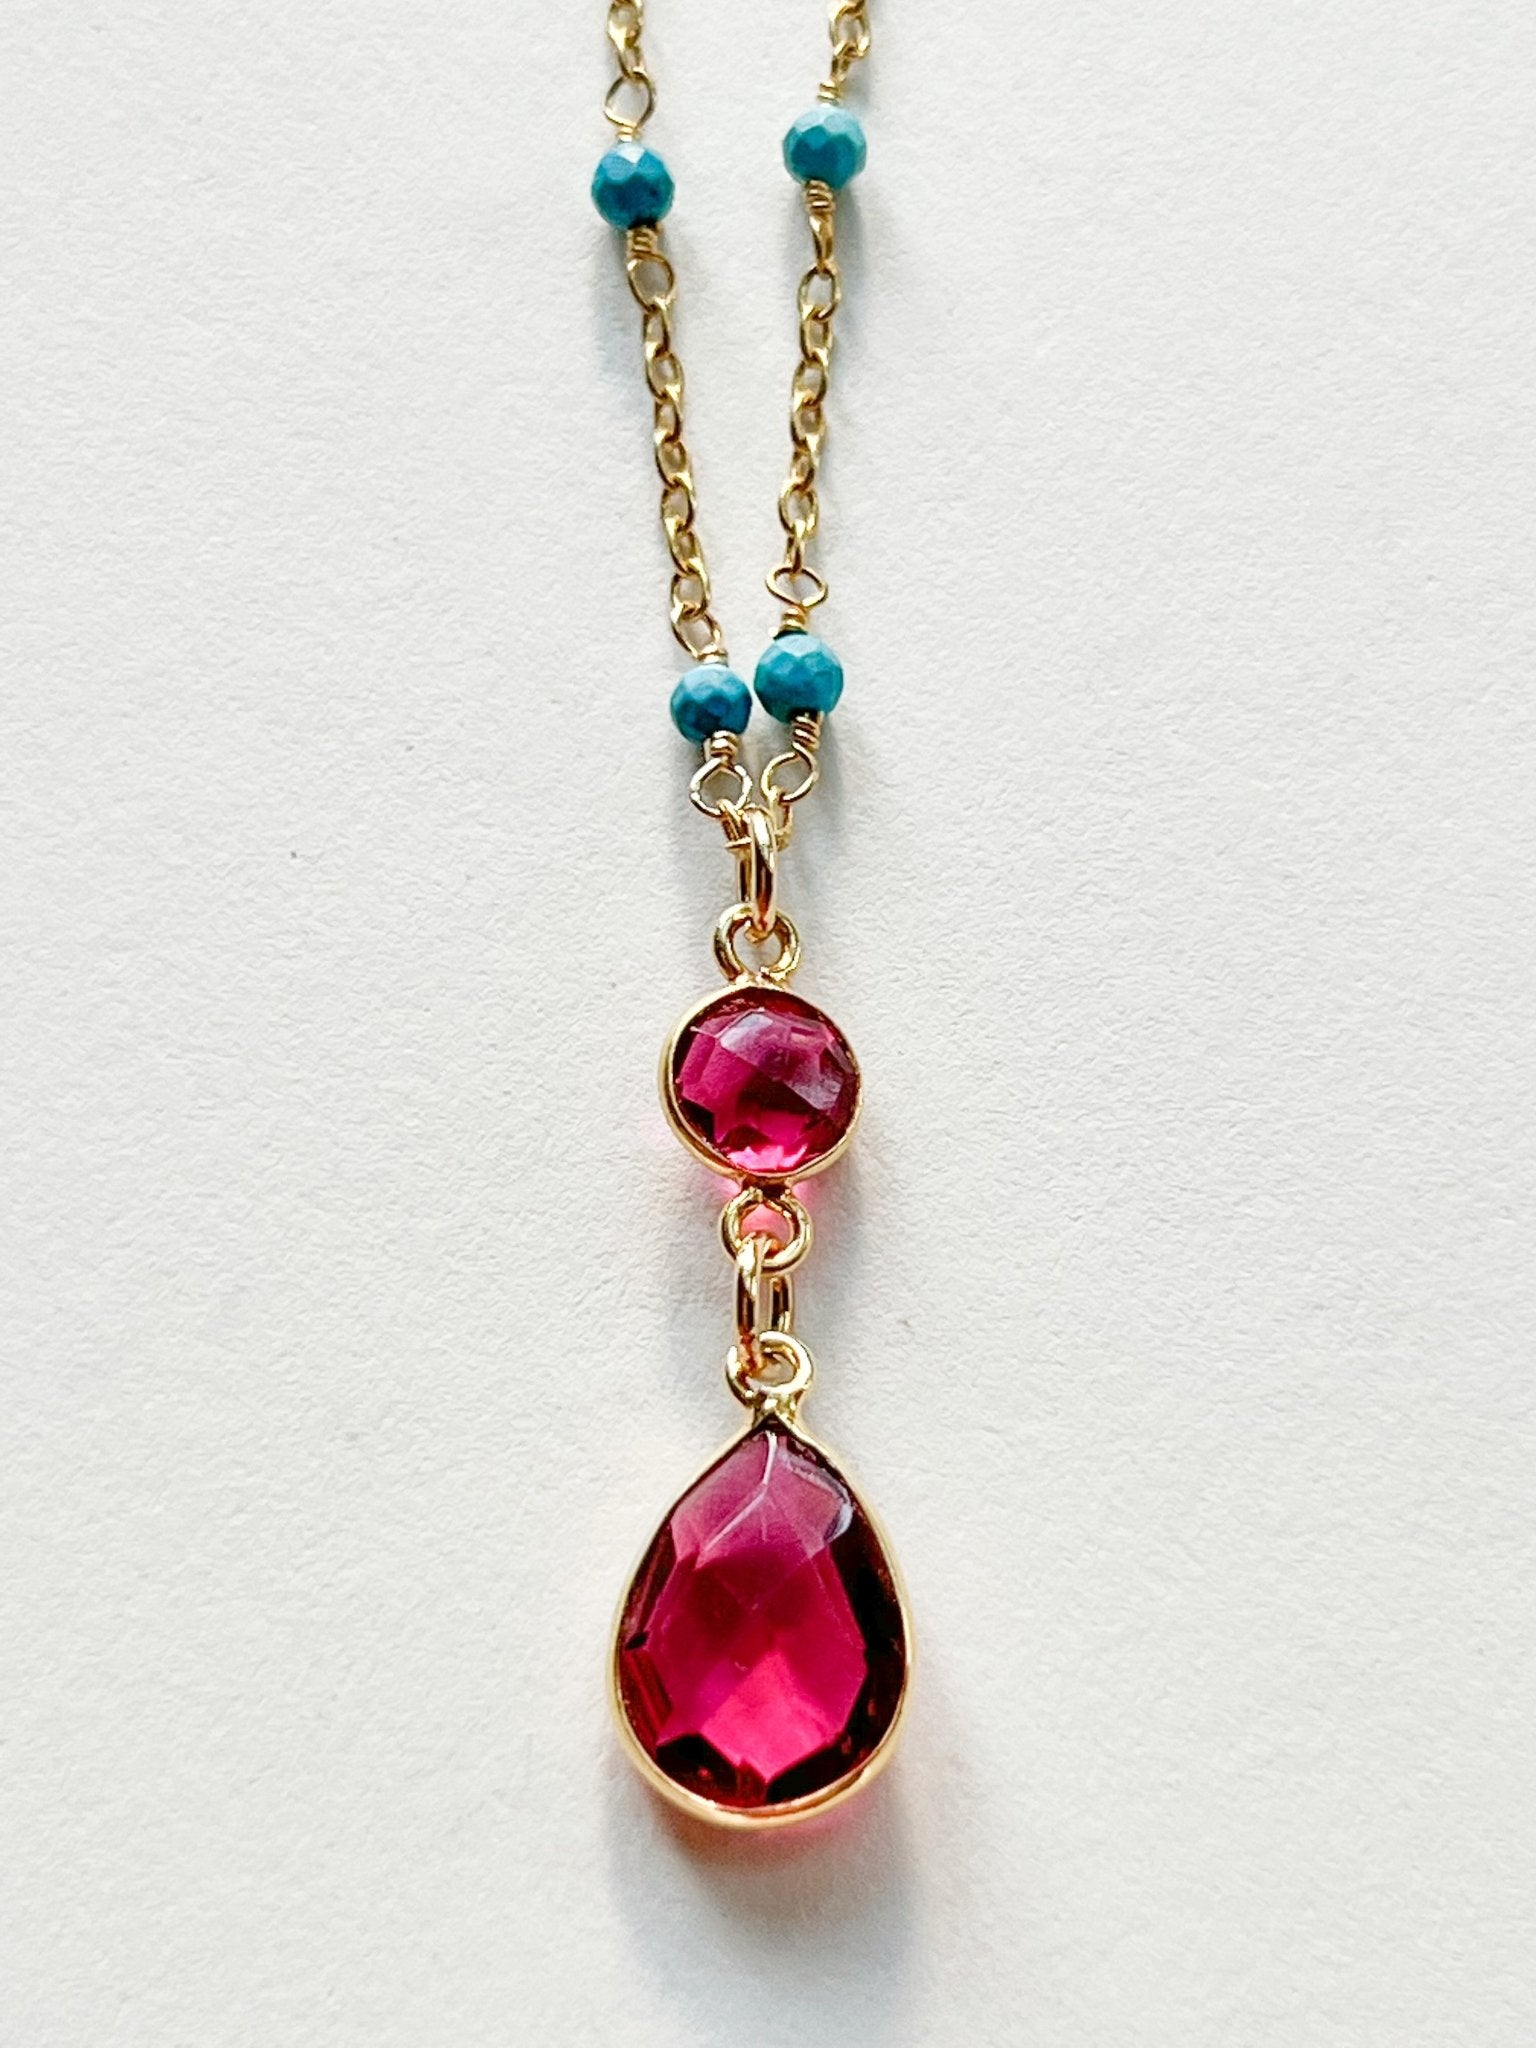 Pink Hydro Quartz Double Drop Pear Shaped Pendant Necklace on Gold Chain with Arizona Turquoise by Sage Machado - The Sage Lifestyle